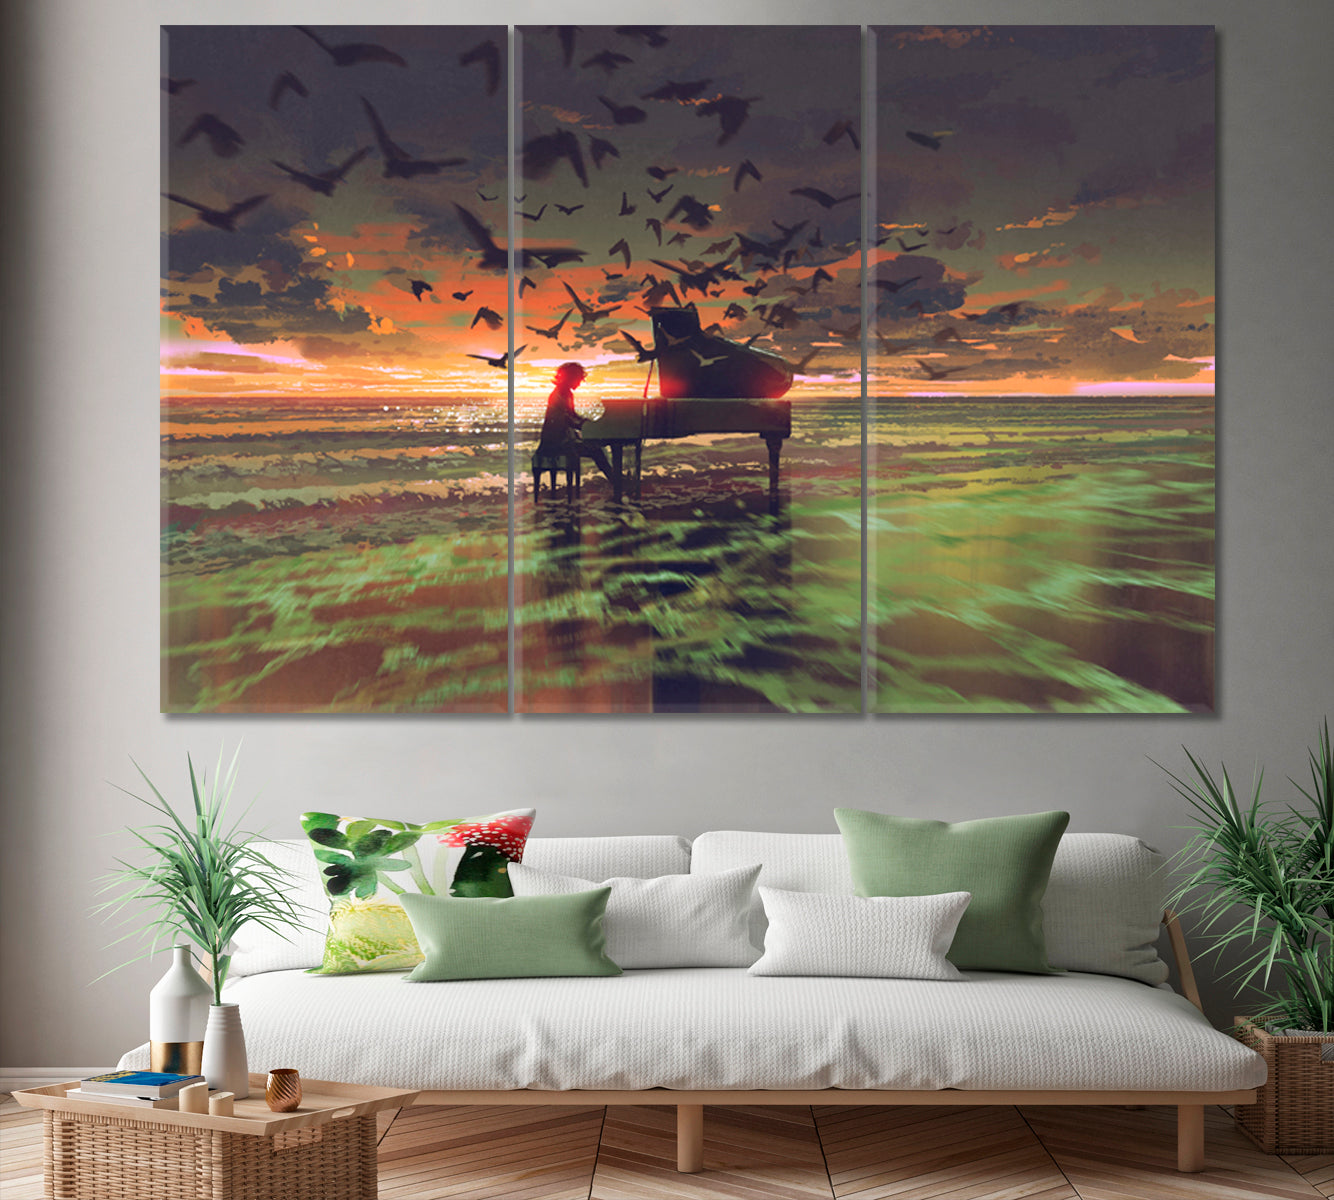 FANTASY Pianist On The Ocean Stunning Unique Mysterious Surreal Fantasy Large Art Print Décor Artesty 3 panels 36" x 24" 